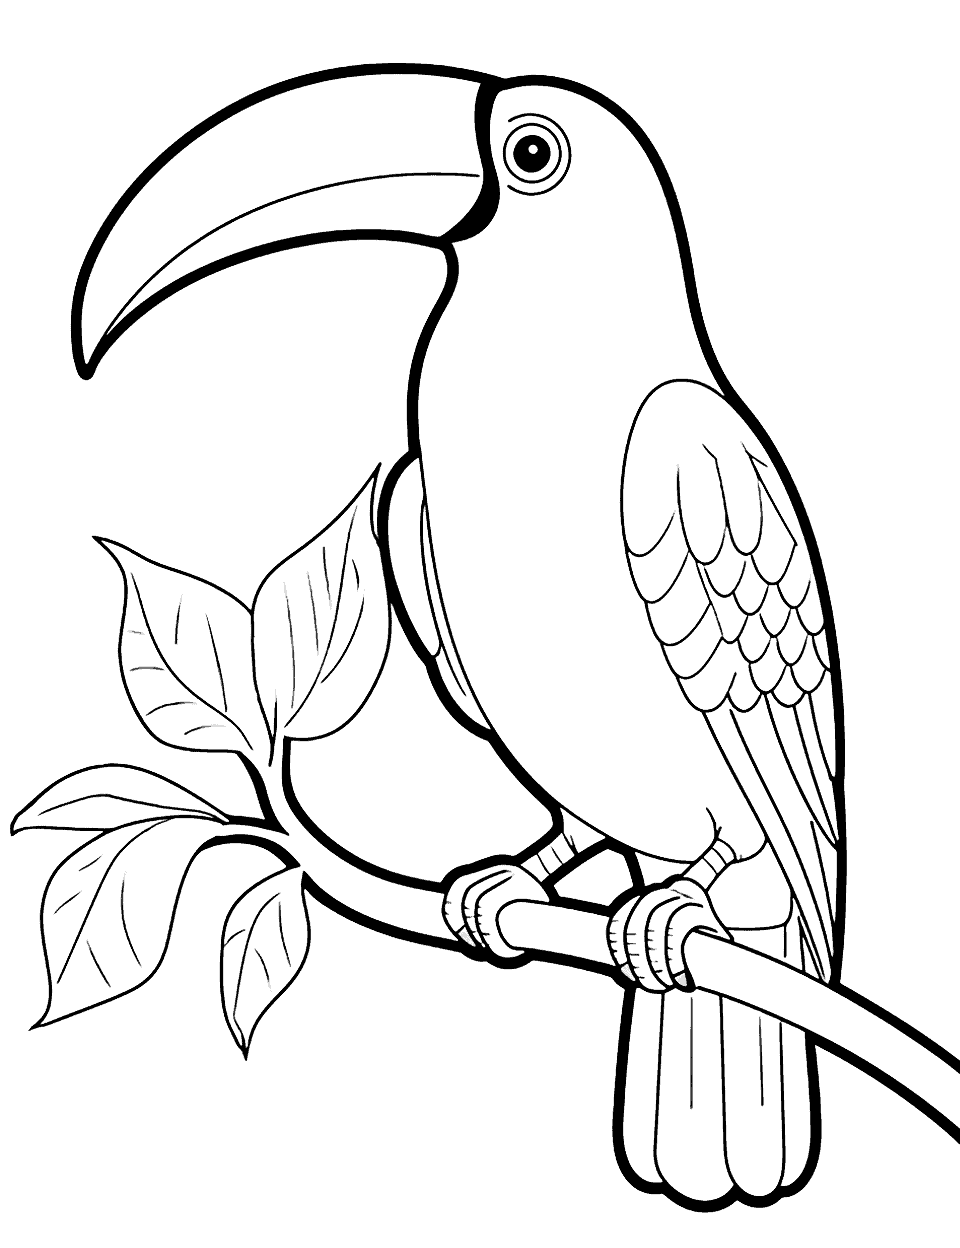 Colorful Toucan Animal Coloring Page - A vibrant toucan perched on a tree branch with its colorful beak.